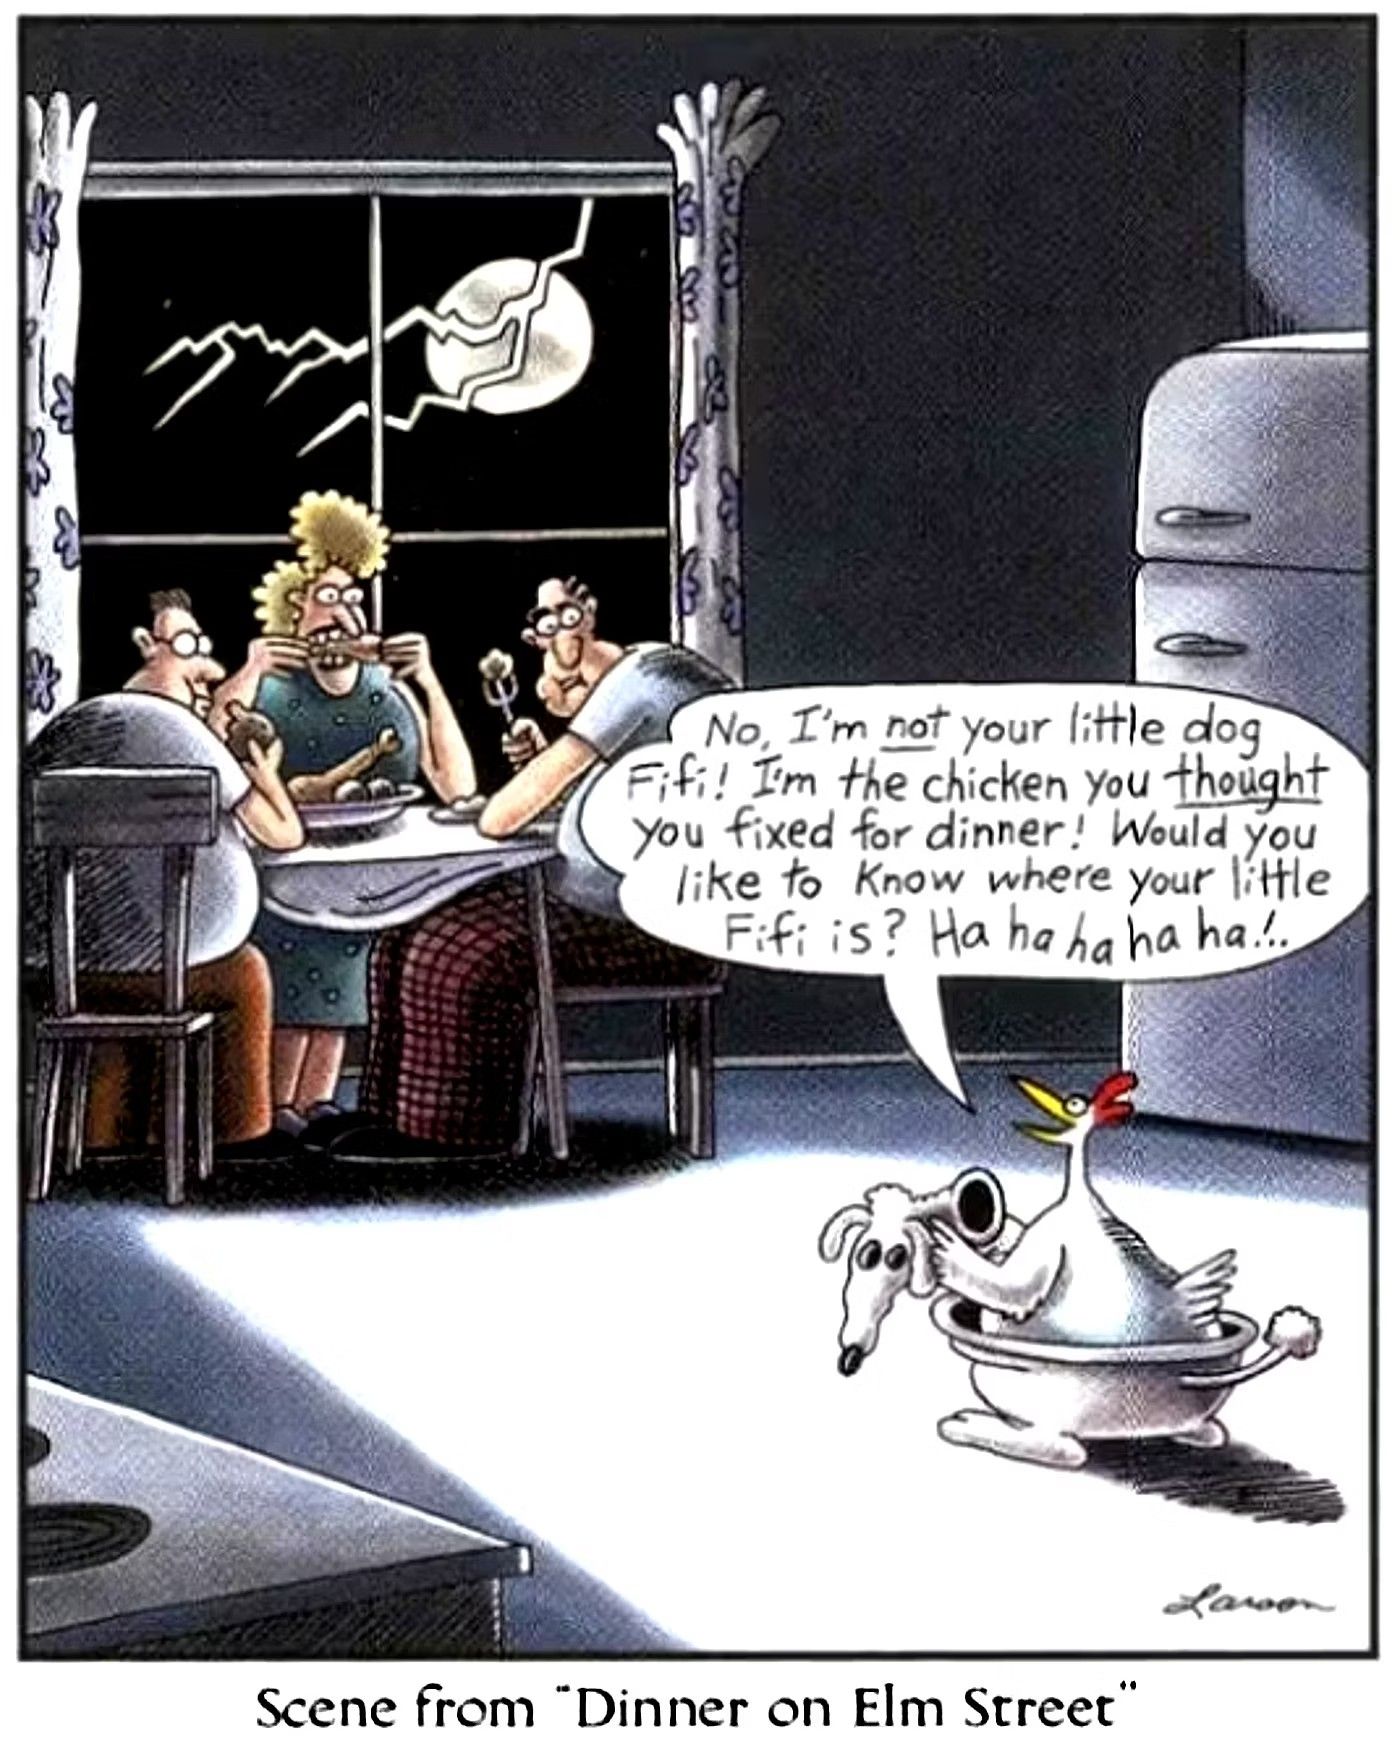 10 Funniest Far Side Comics That Prove It’s Obsessed with Chickens